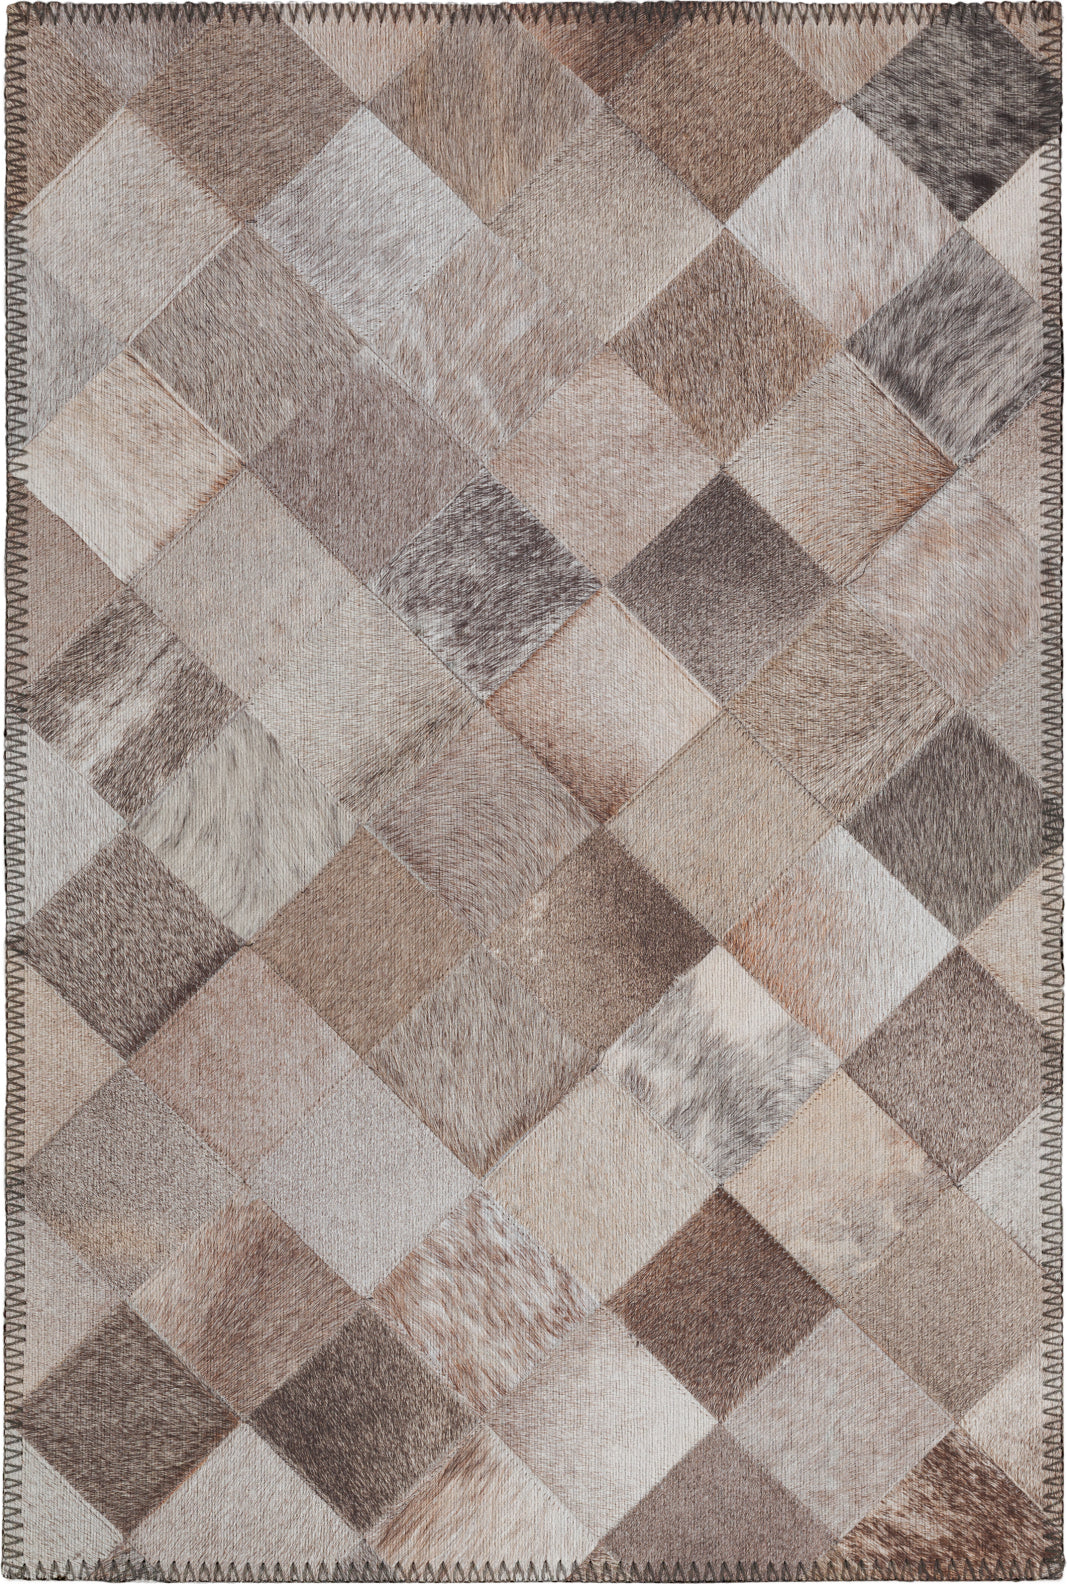 Dalyn Stetson SS2 Flannel Area Rug main image